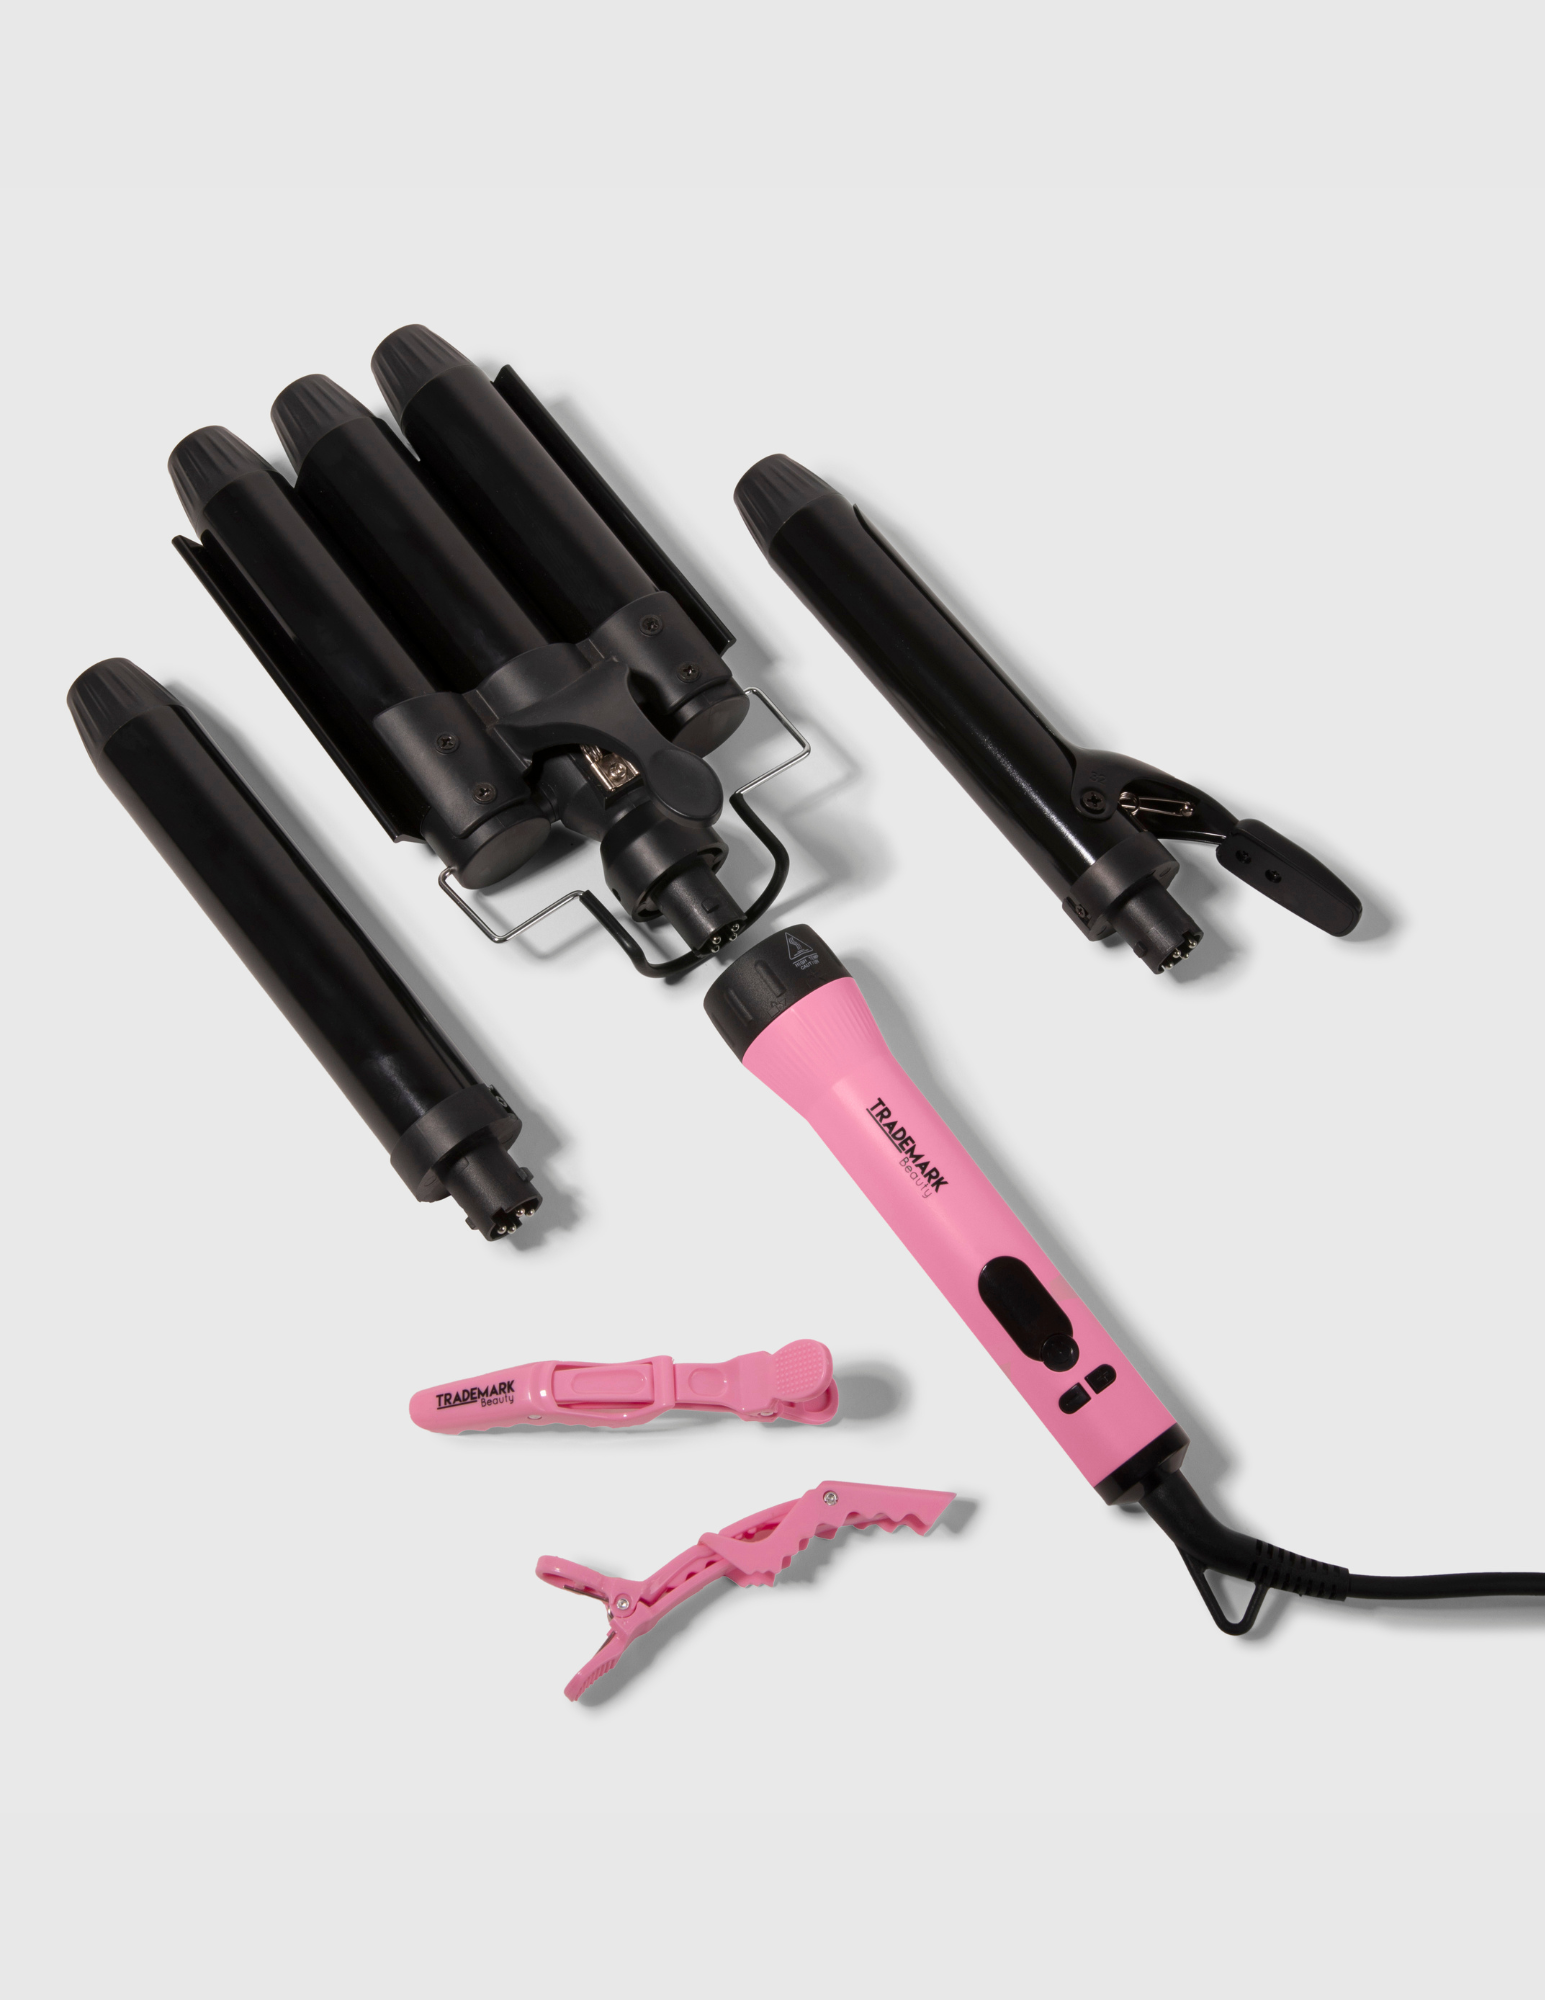 BaByliss Smooth Radiance Curling Wand - Compare Prices & Where To Buy 